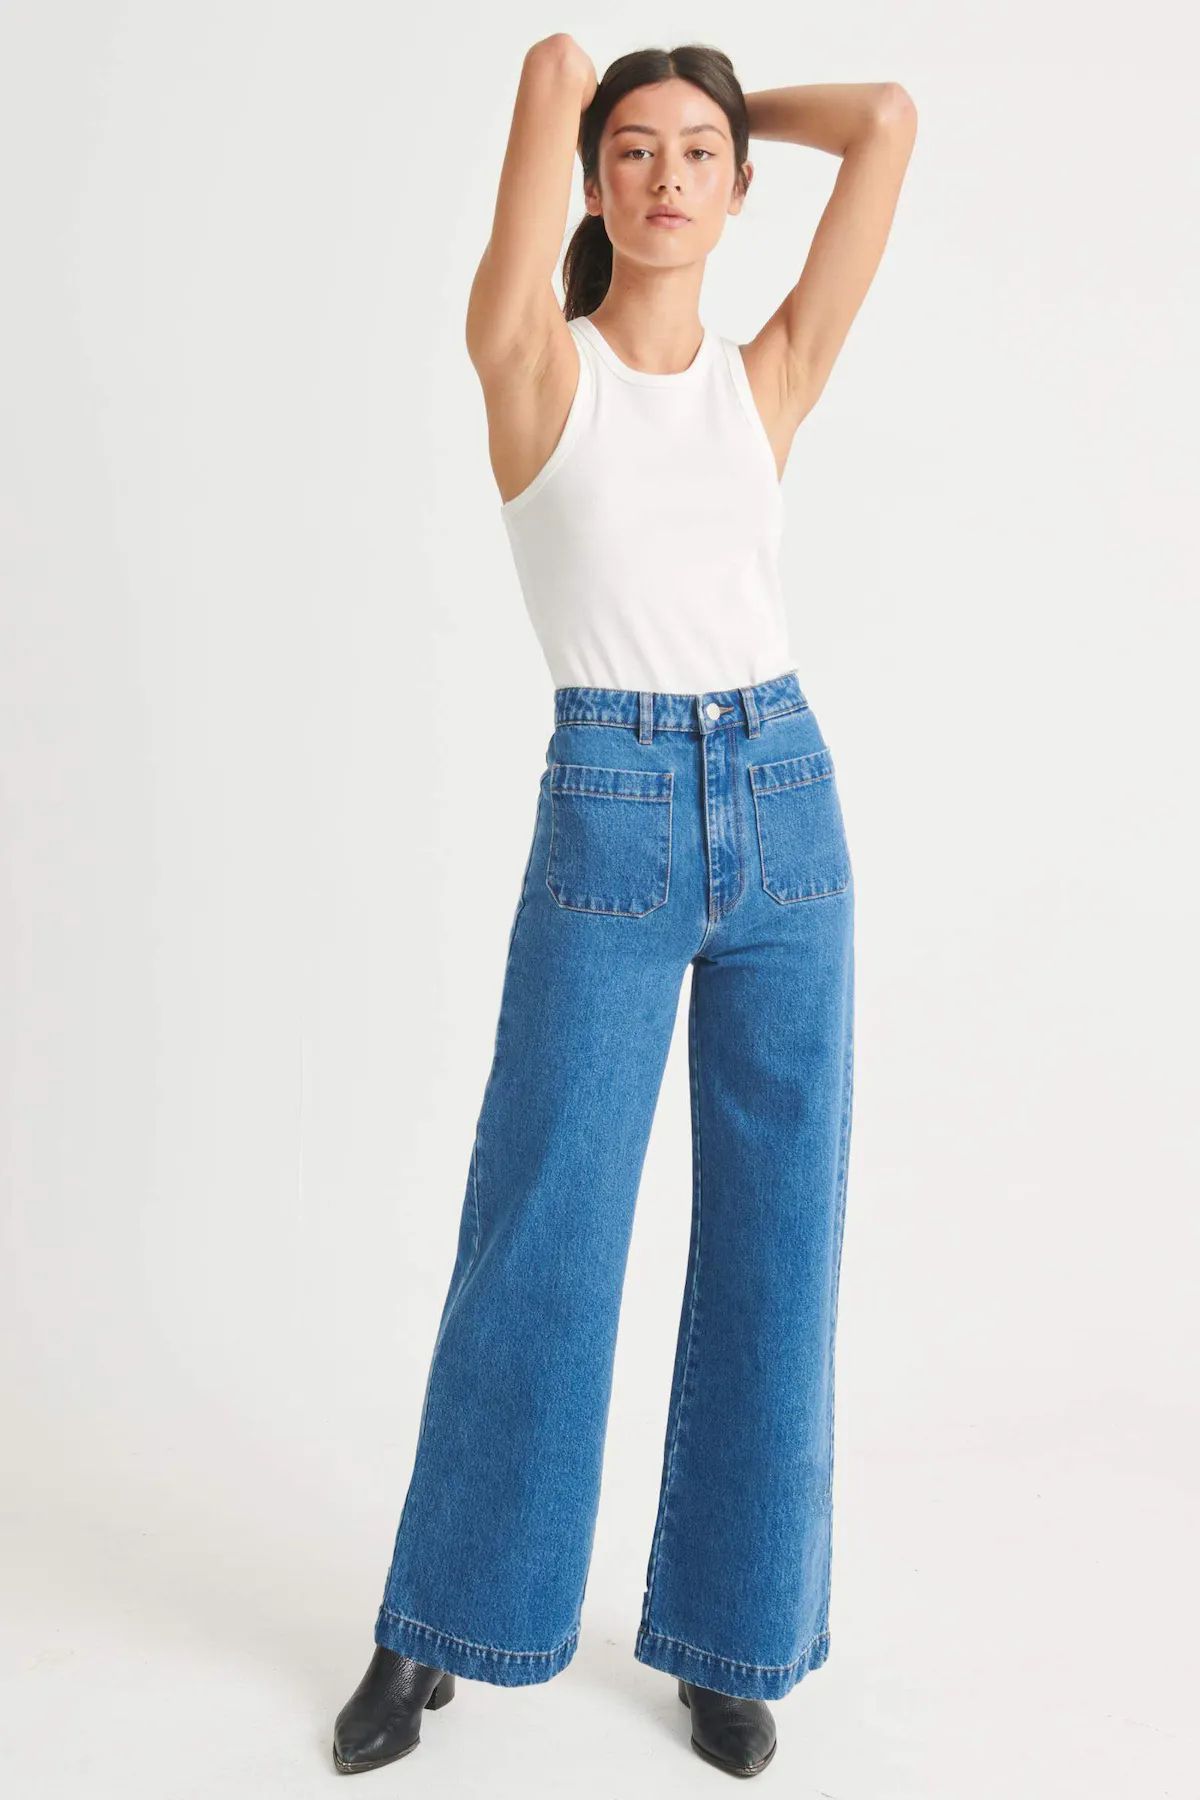 Sailor Jean Long - Ashley Blue | Rolla's Jeans US/CAN